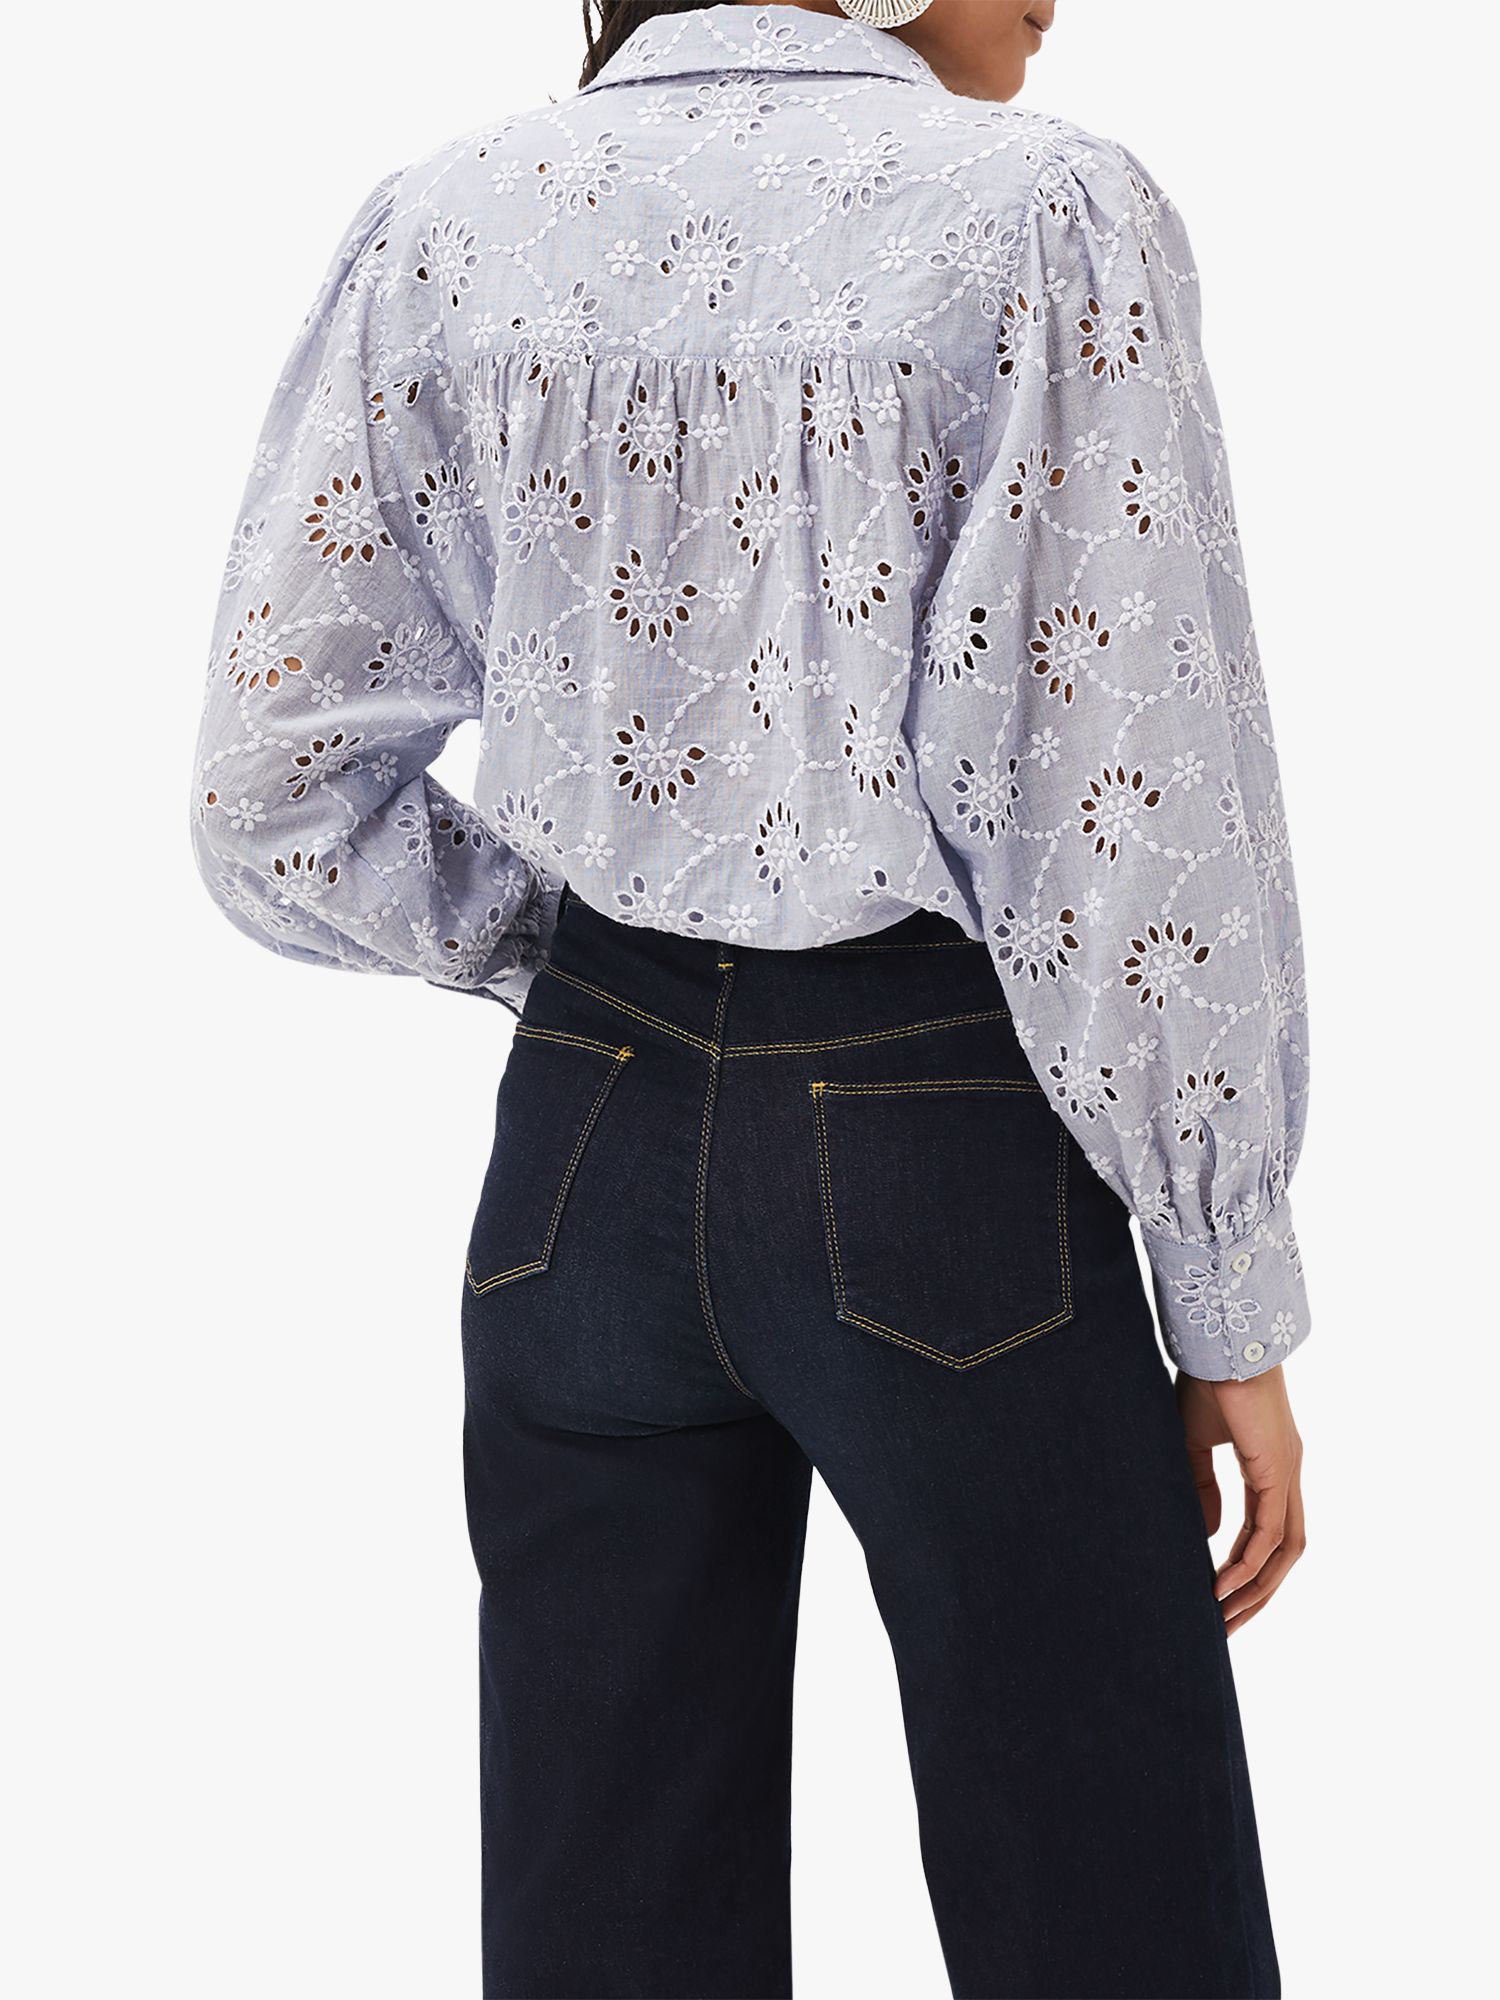 Phase Eight Amica Broderie Anglaise Blouse, Chambray